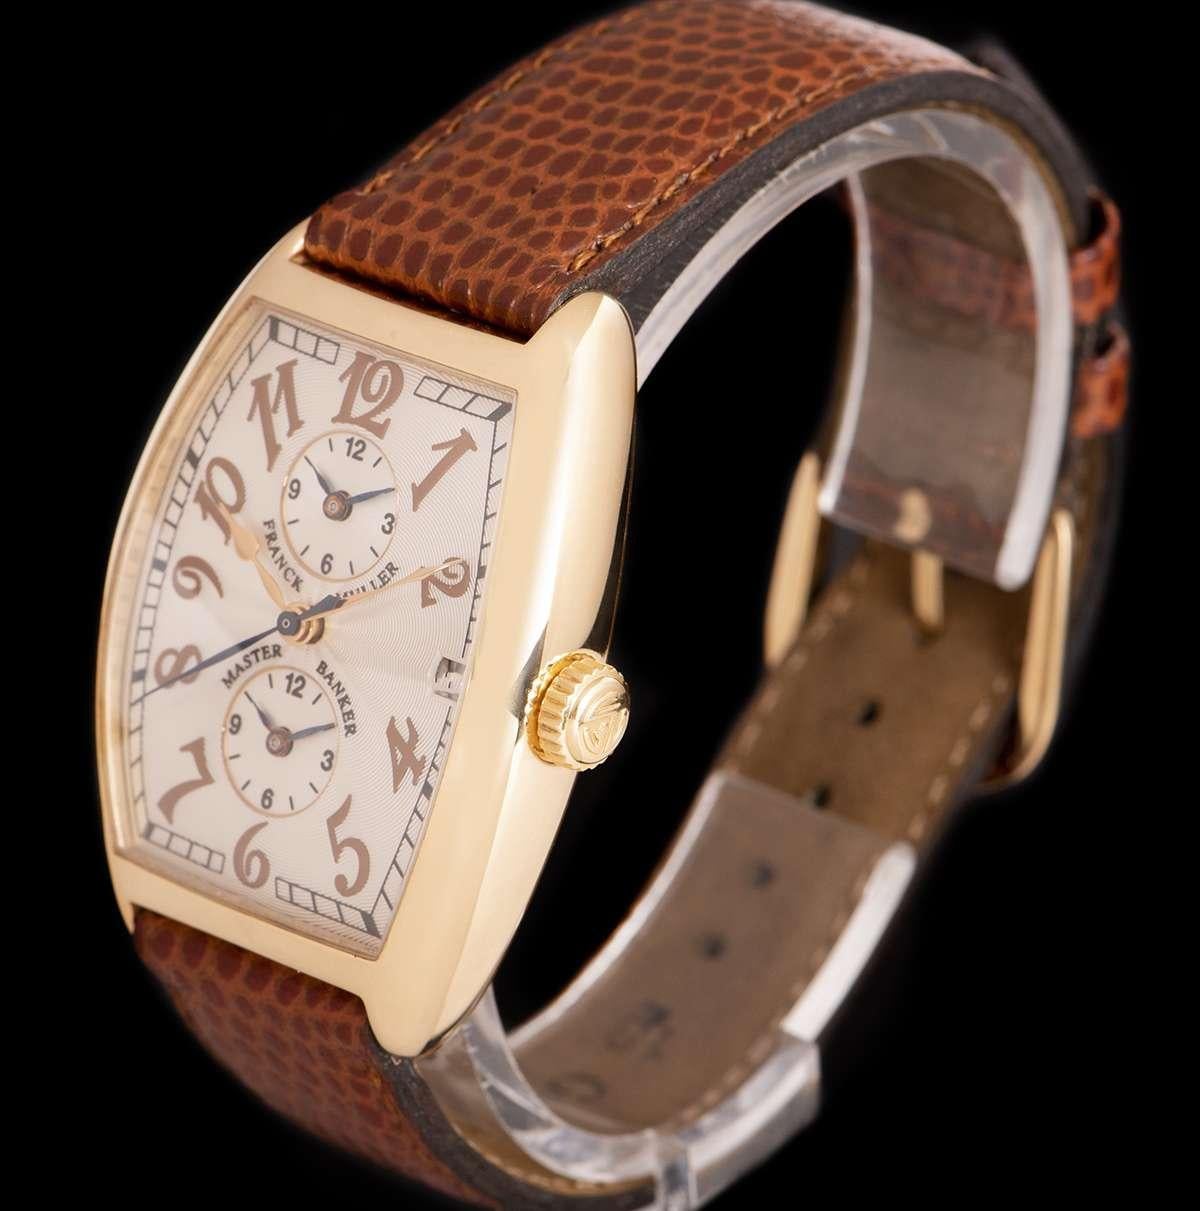 An 18k Rose Gold Master Banker Gents Wristwatch, silver guilloche dial with applied arabic numbers, date at 3 0'clock, 2 additional time zone dials at 6 0'clock and 12 0'clock, a fixed 18k rose bezel, a brand new brown leather strap with an 18k rose